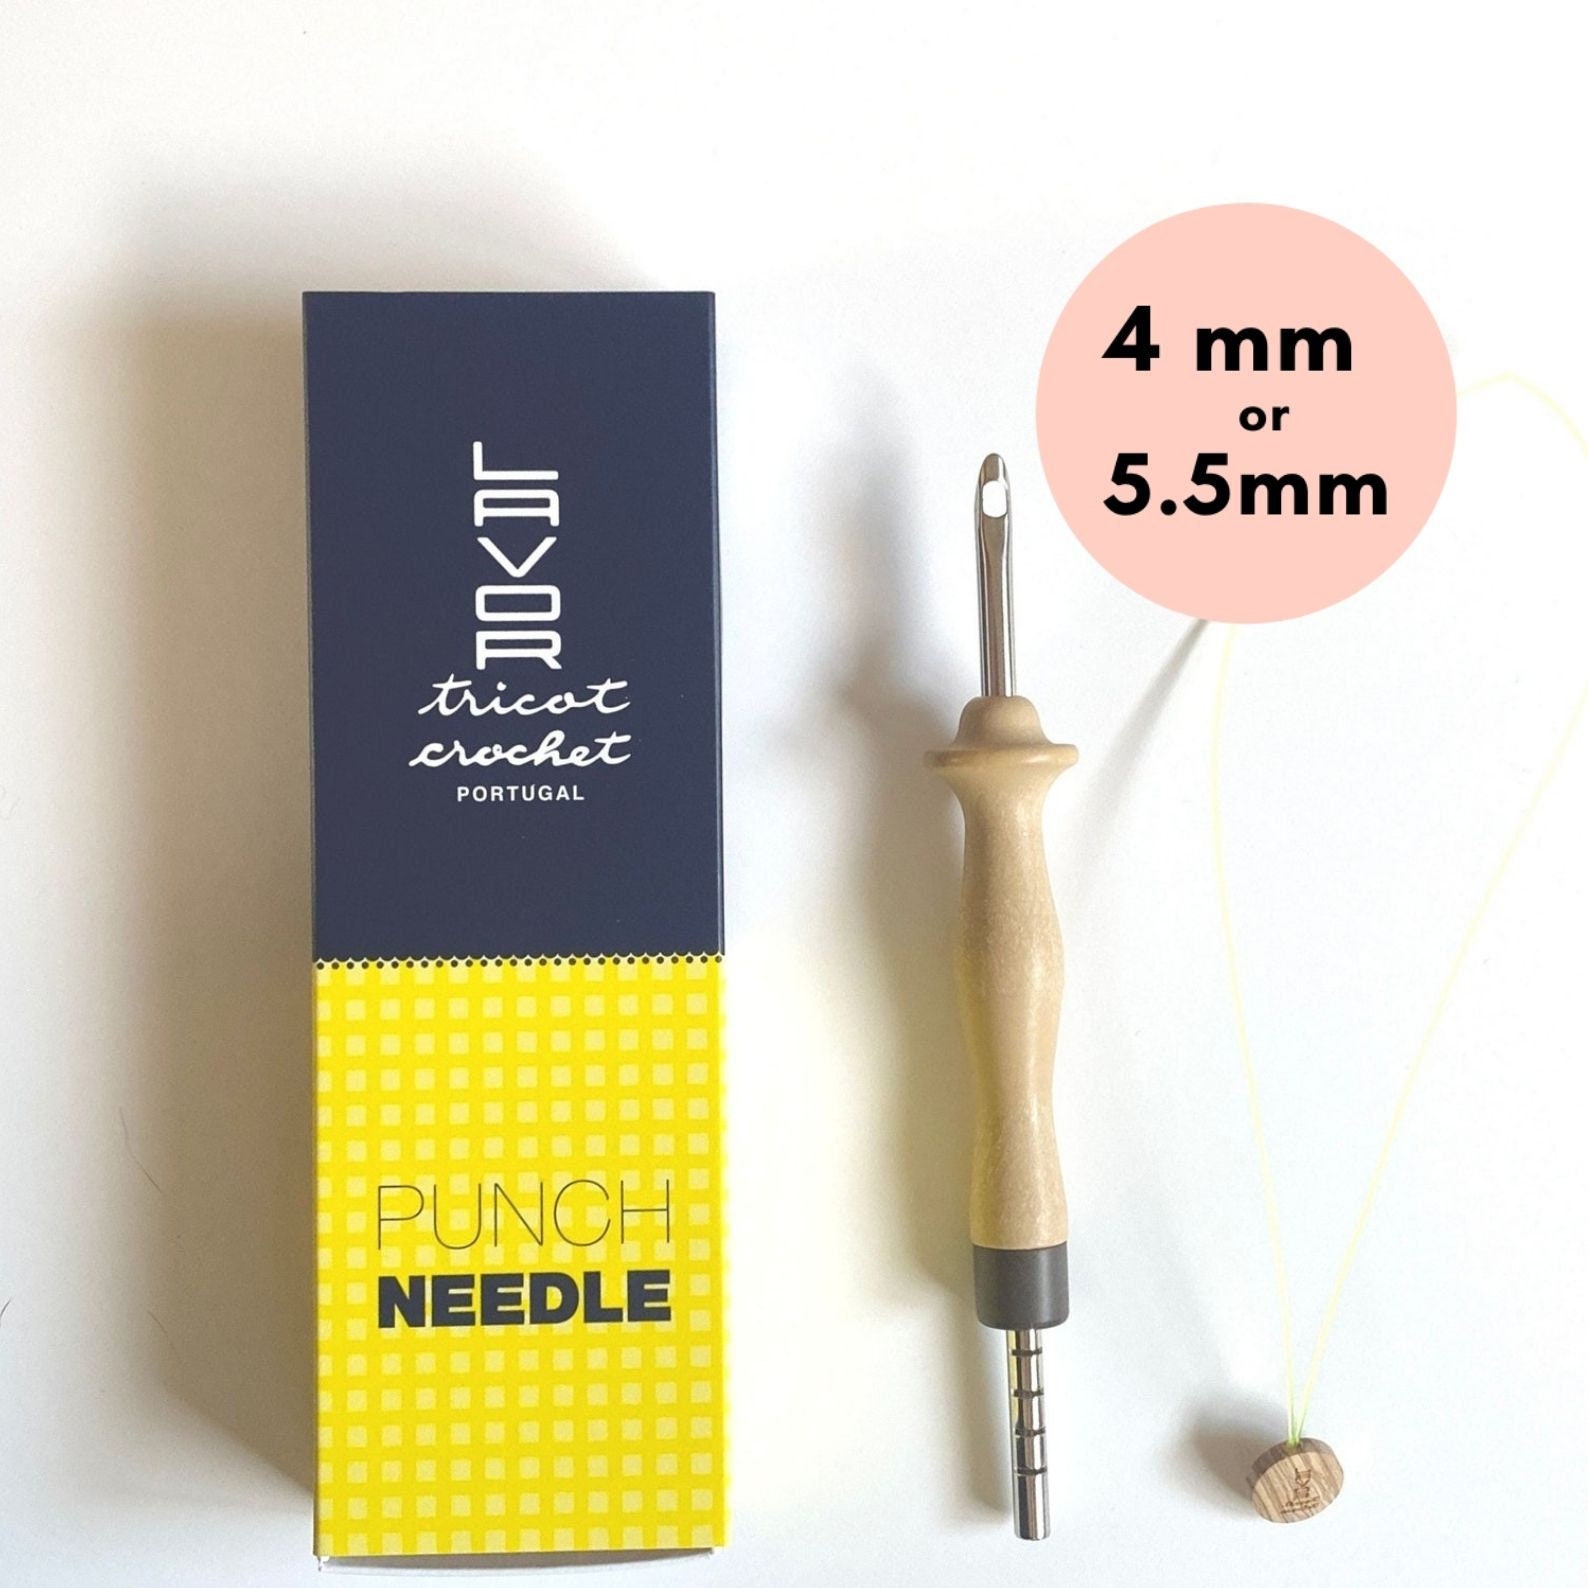 Punch Needle Threader, Long Punch Needle Threaders, Ultra Punch Needle  Threader, Needle Threader for the Lavor Needle or Adjustable Needle 